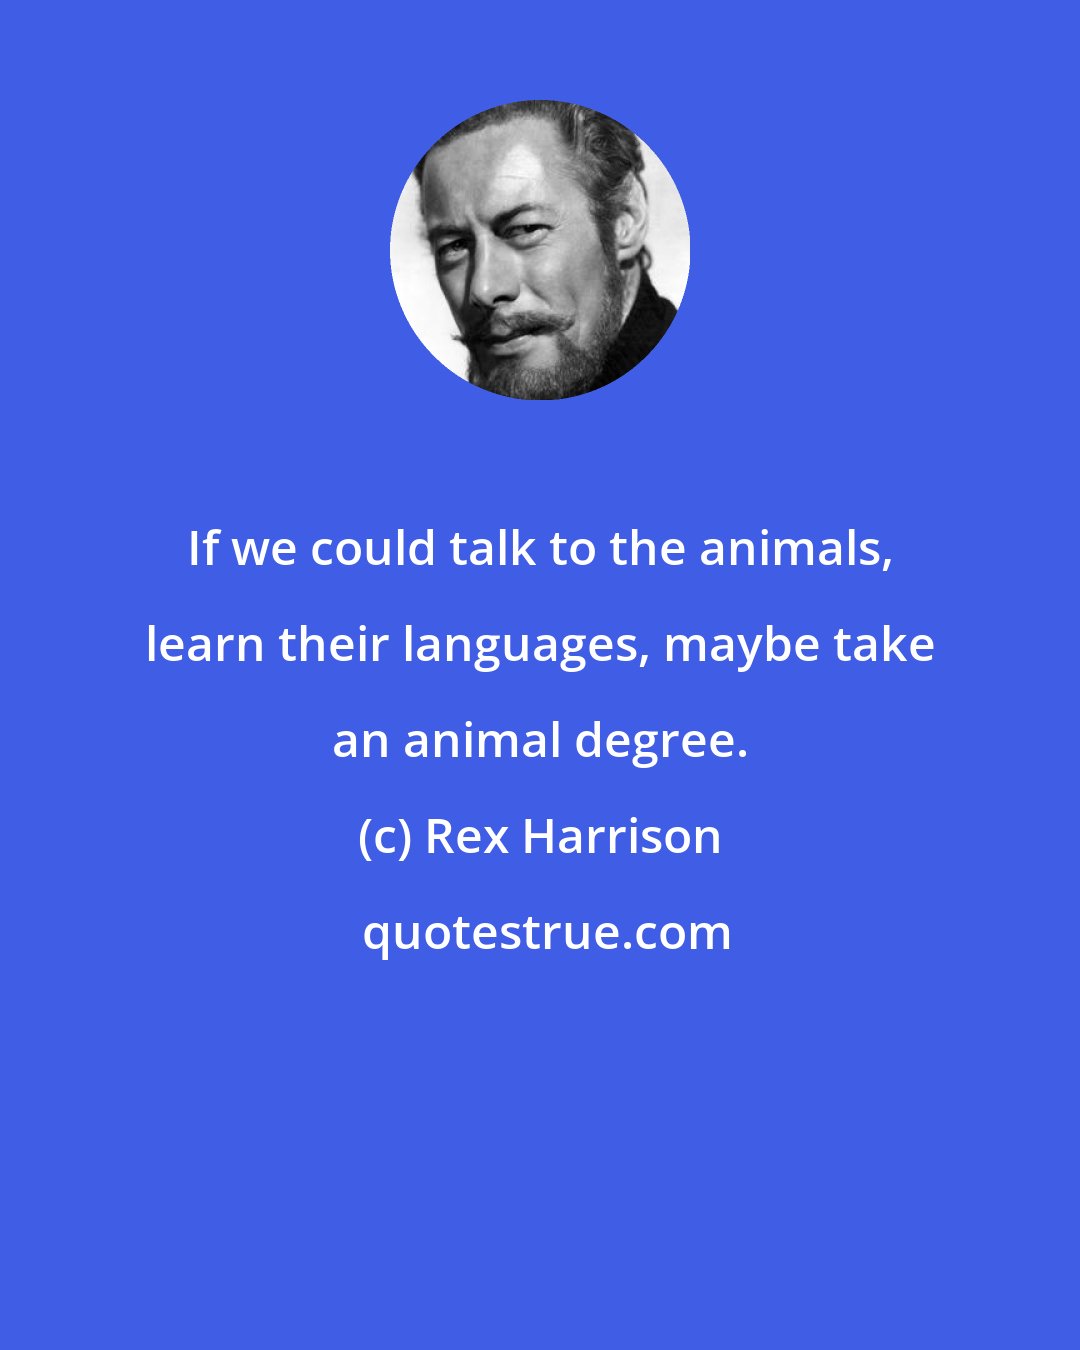 Rex Harrison: If we could talk to the animals, learn their languages, maybe take an animal degree.